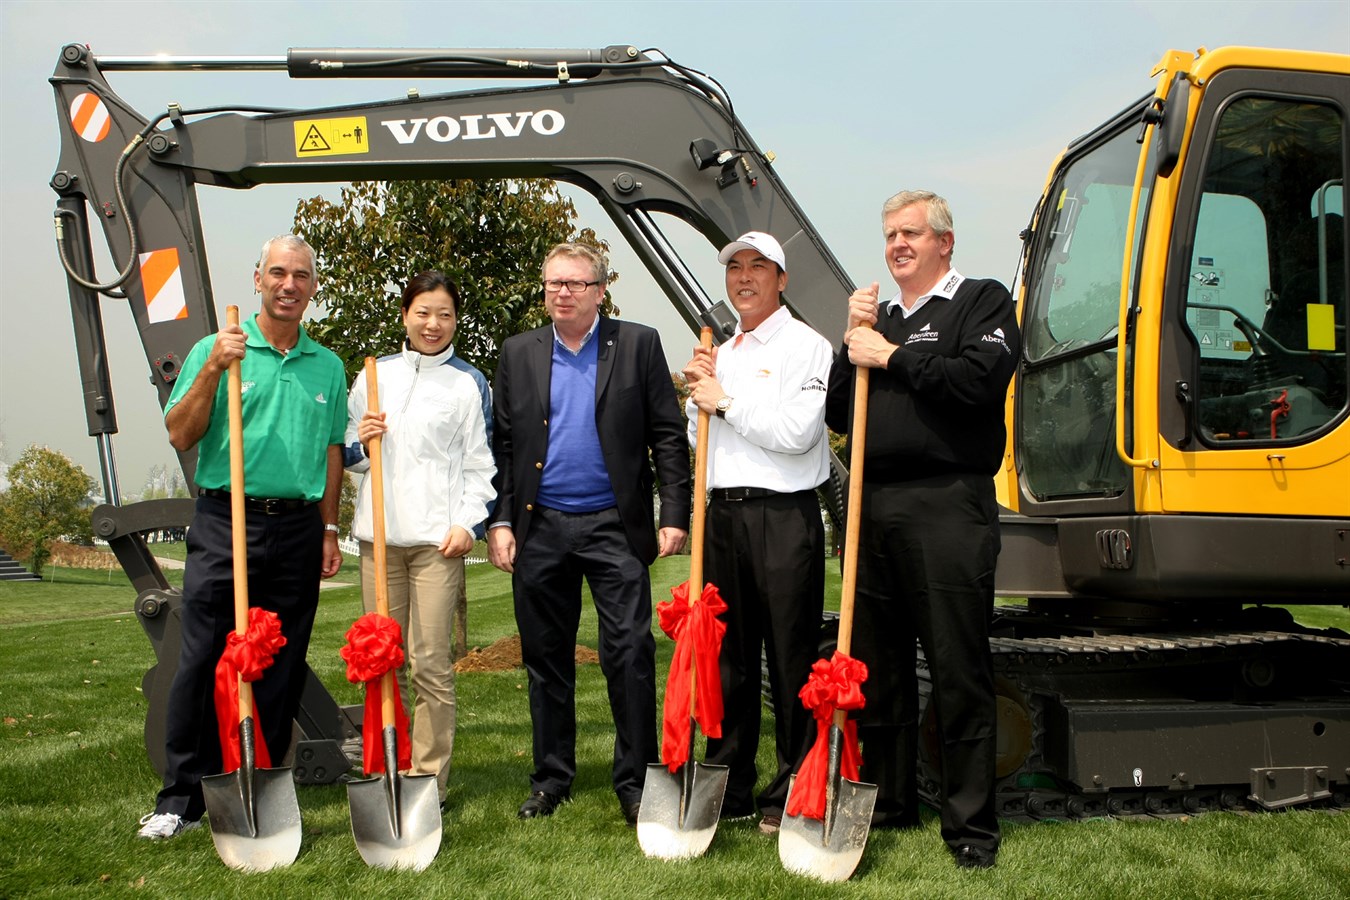 Golf players planting trees, Volvo China Open 2010